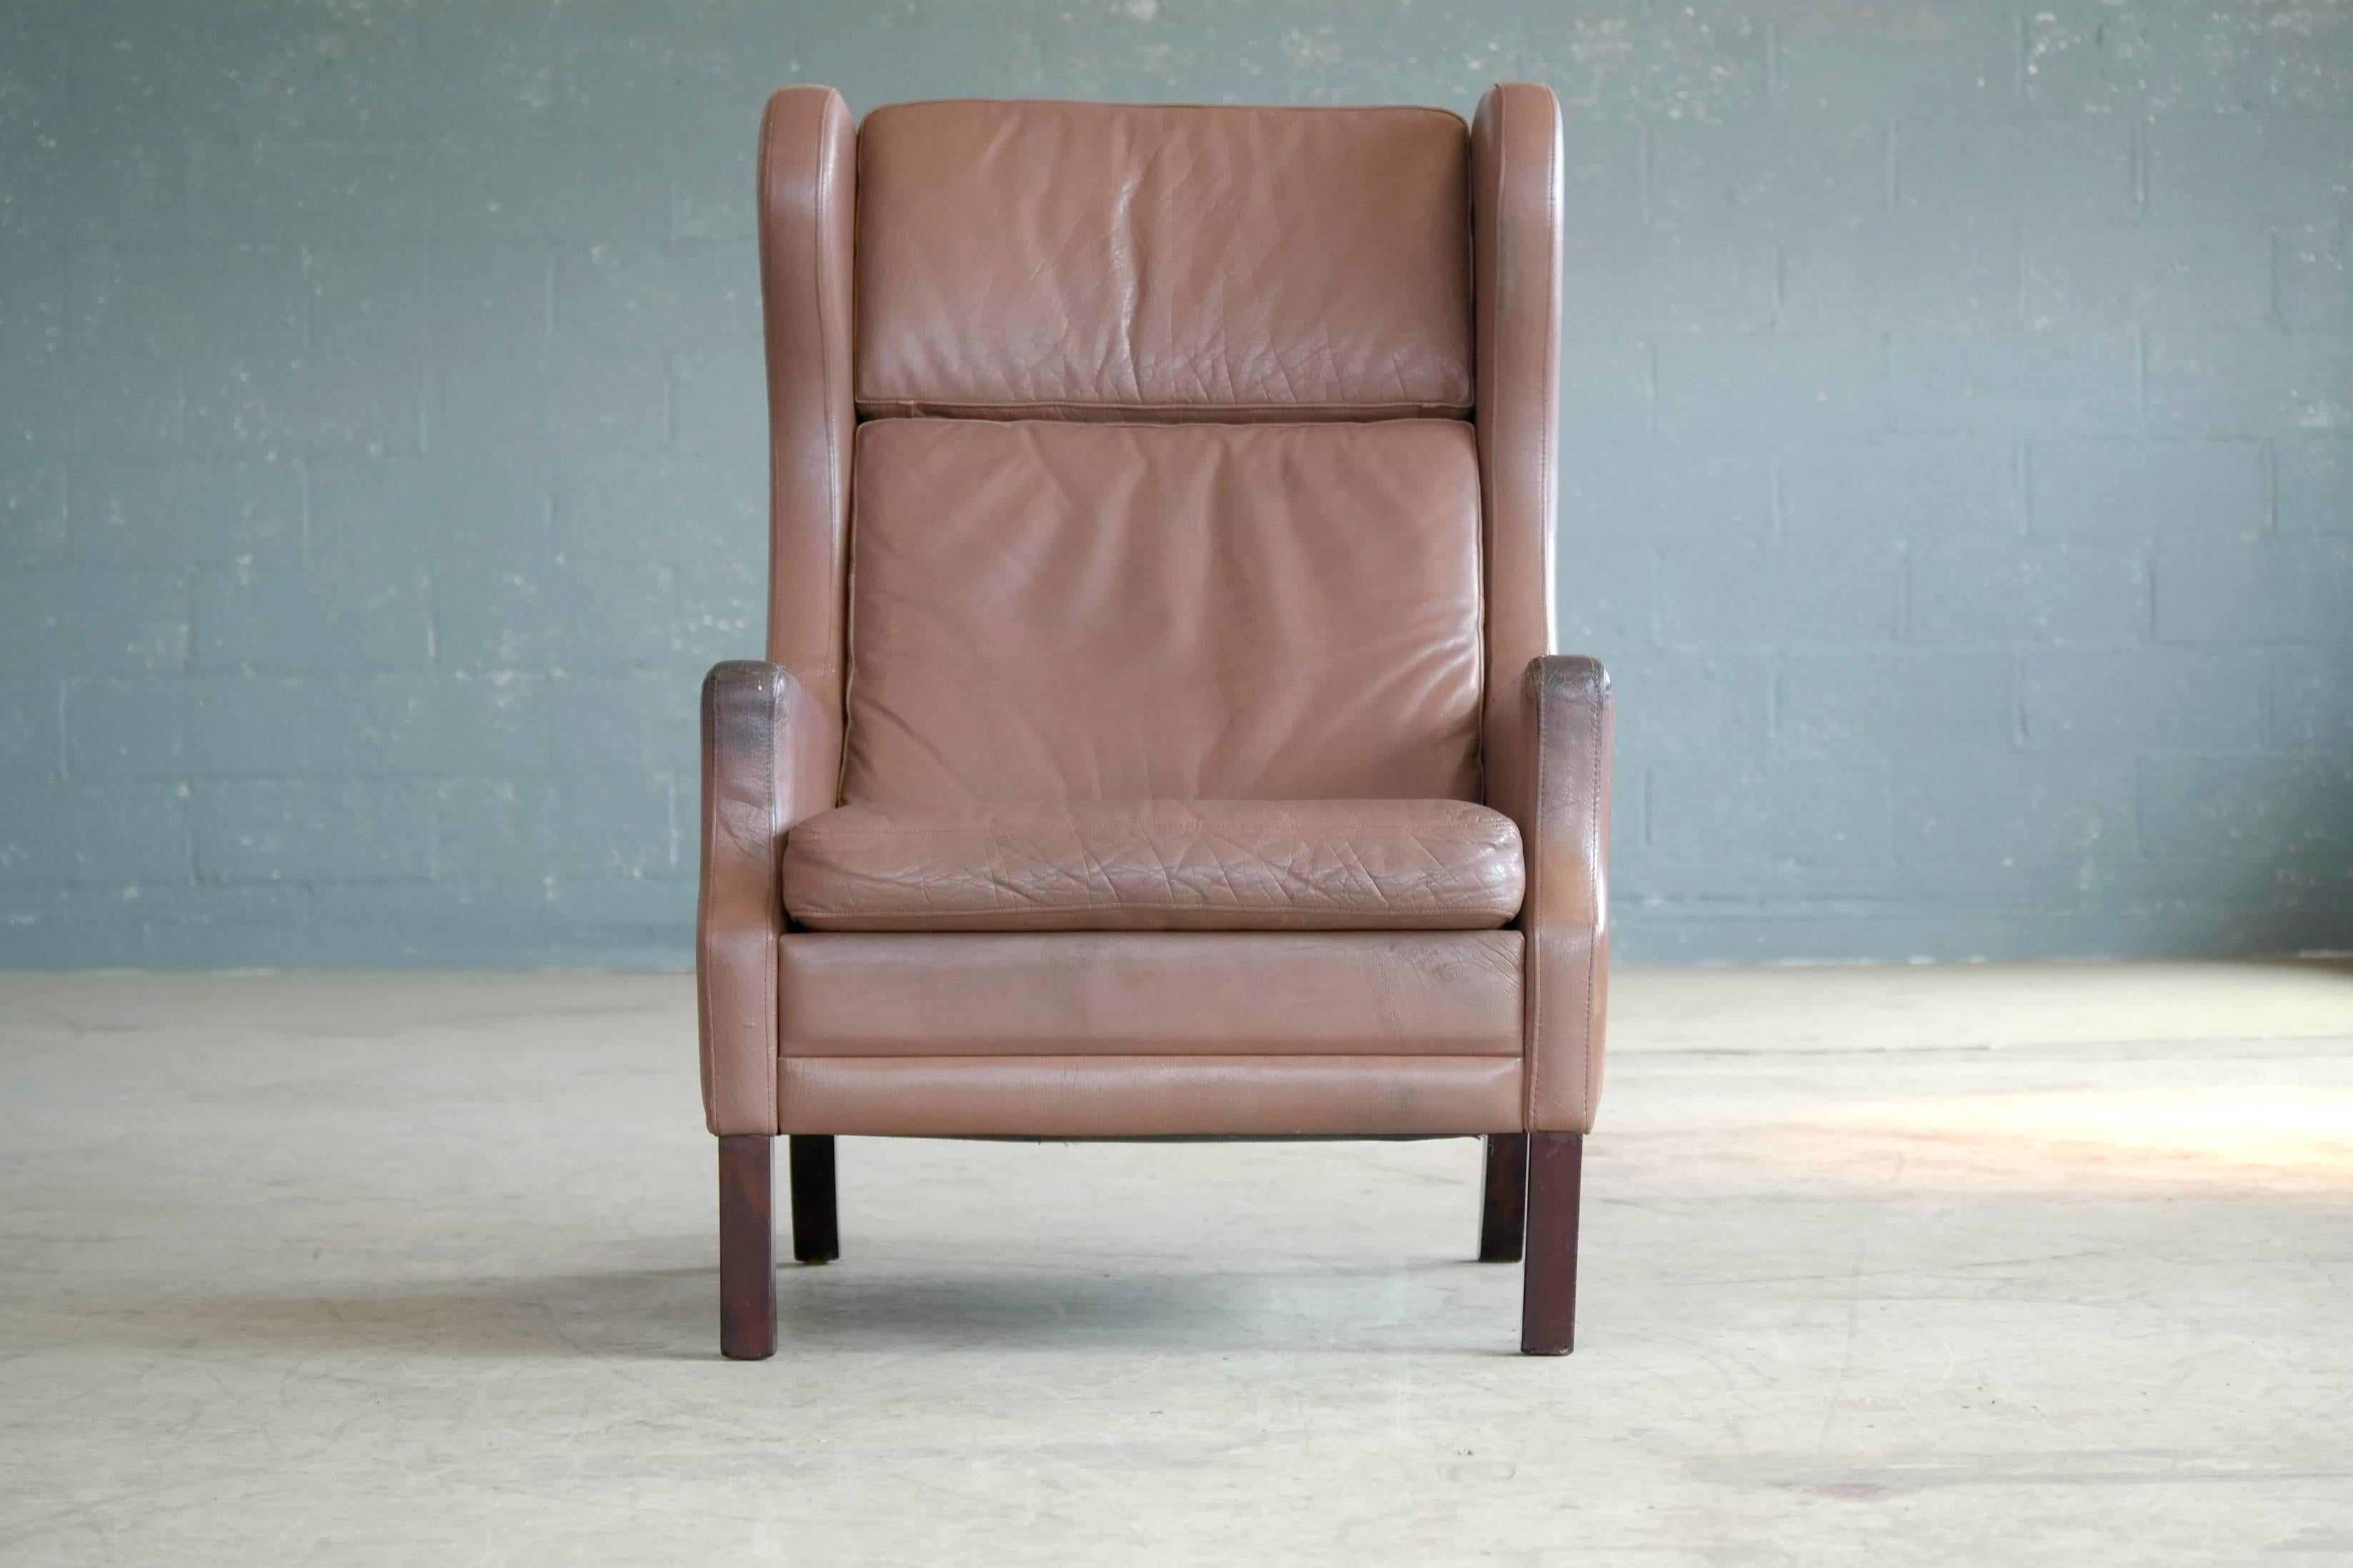 Georg Thams wingback chair in cappuccino colored leather. Made in the 1960s or early 1970s and very much in the style of Borge Mogensen. Great patina and age wear to the leather adding charm and character. Overall very good condition.